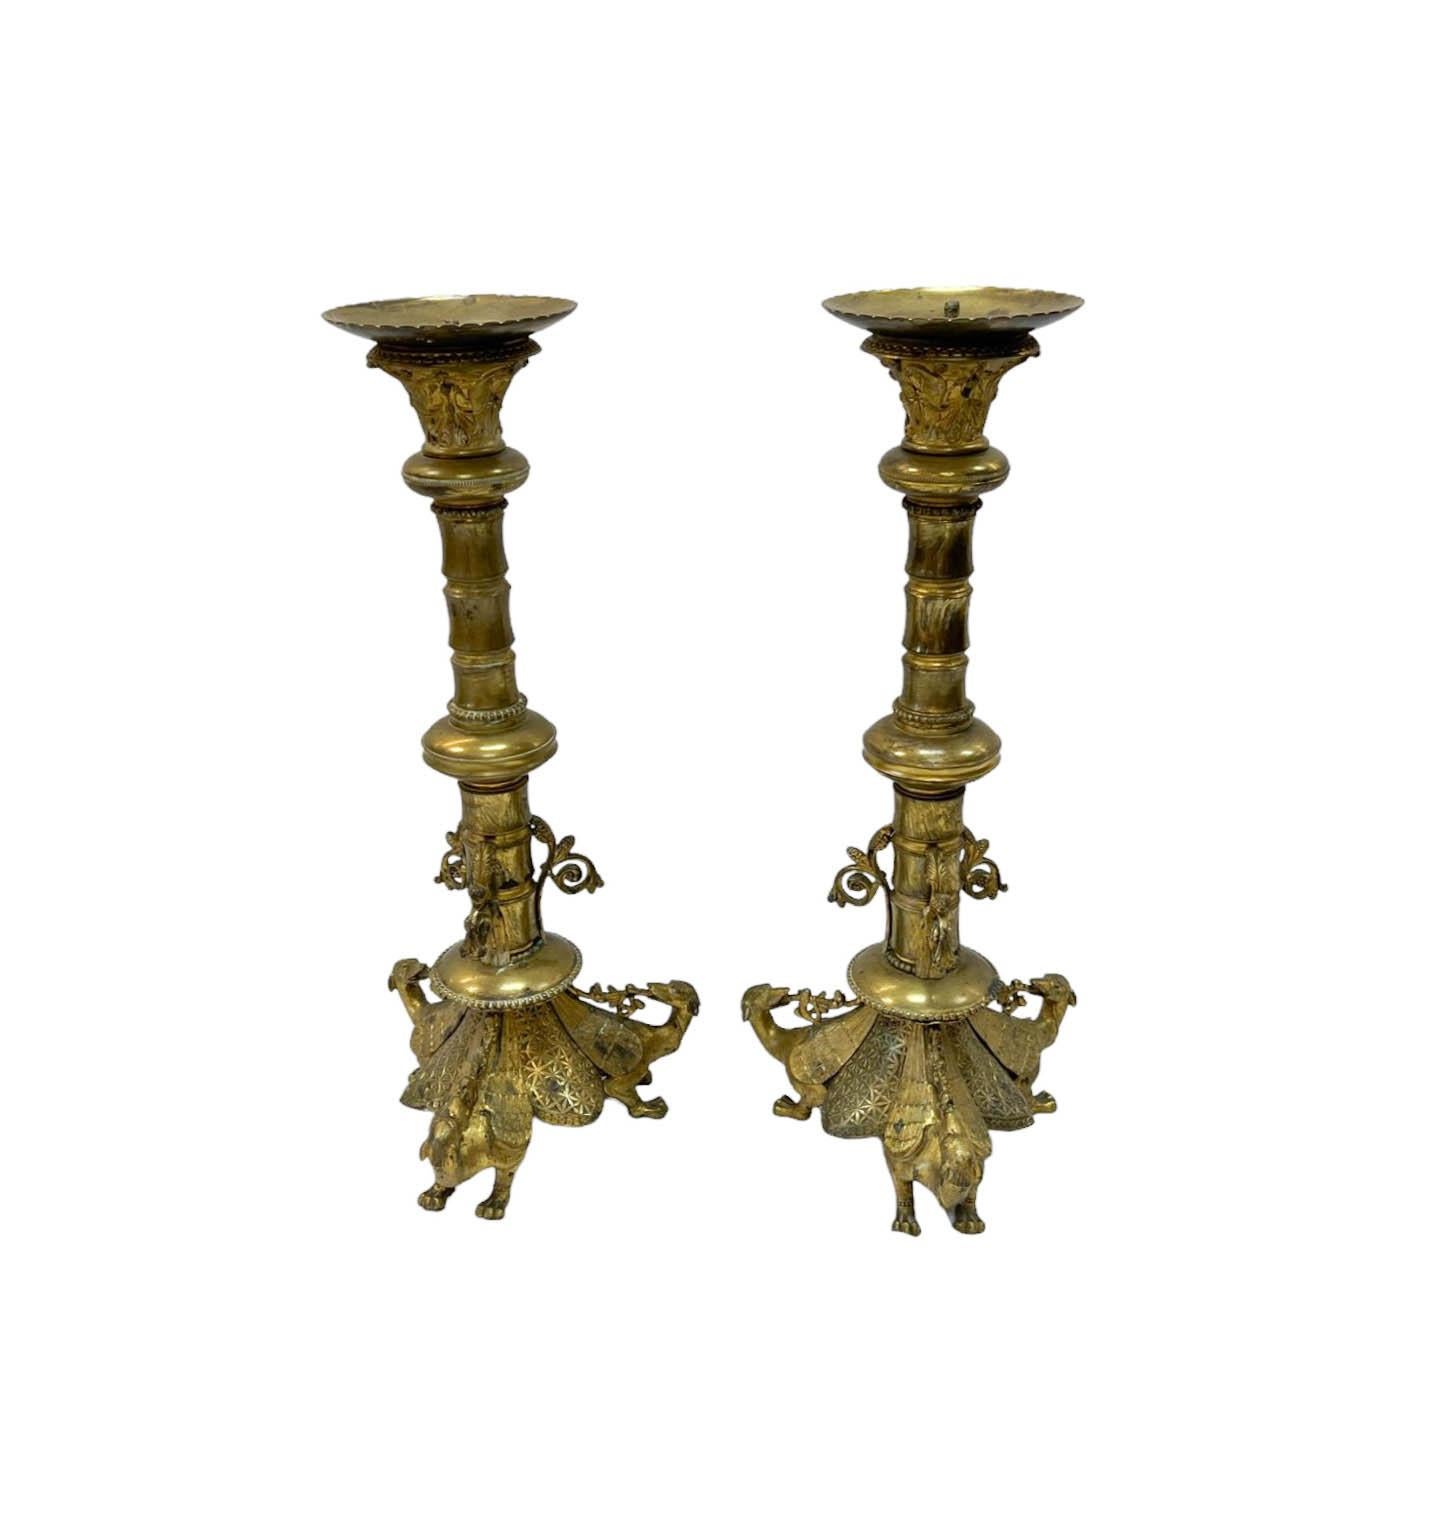 Pair of large antique brass candle holders. The iconography depicting the winged dog/lion can be traced back to the East Slavic tradition of mythological creatures. 